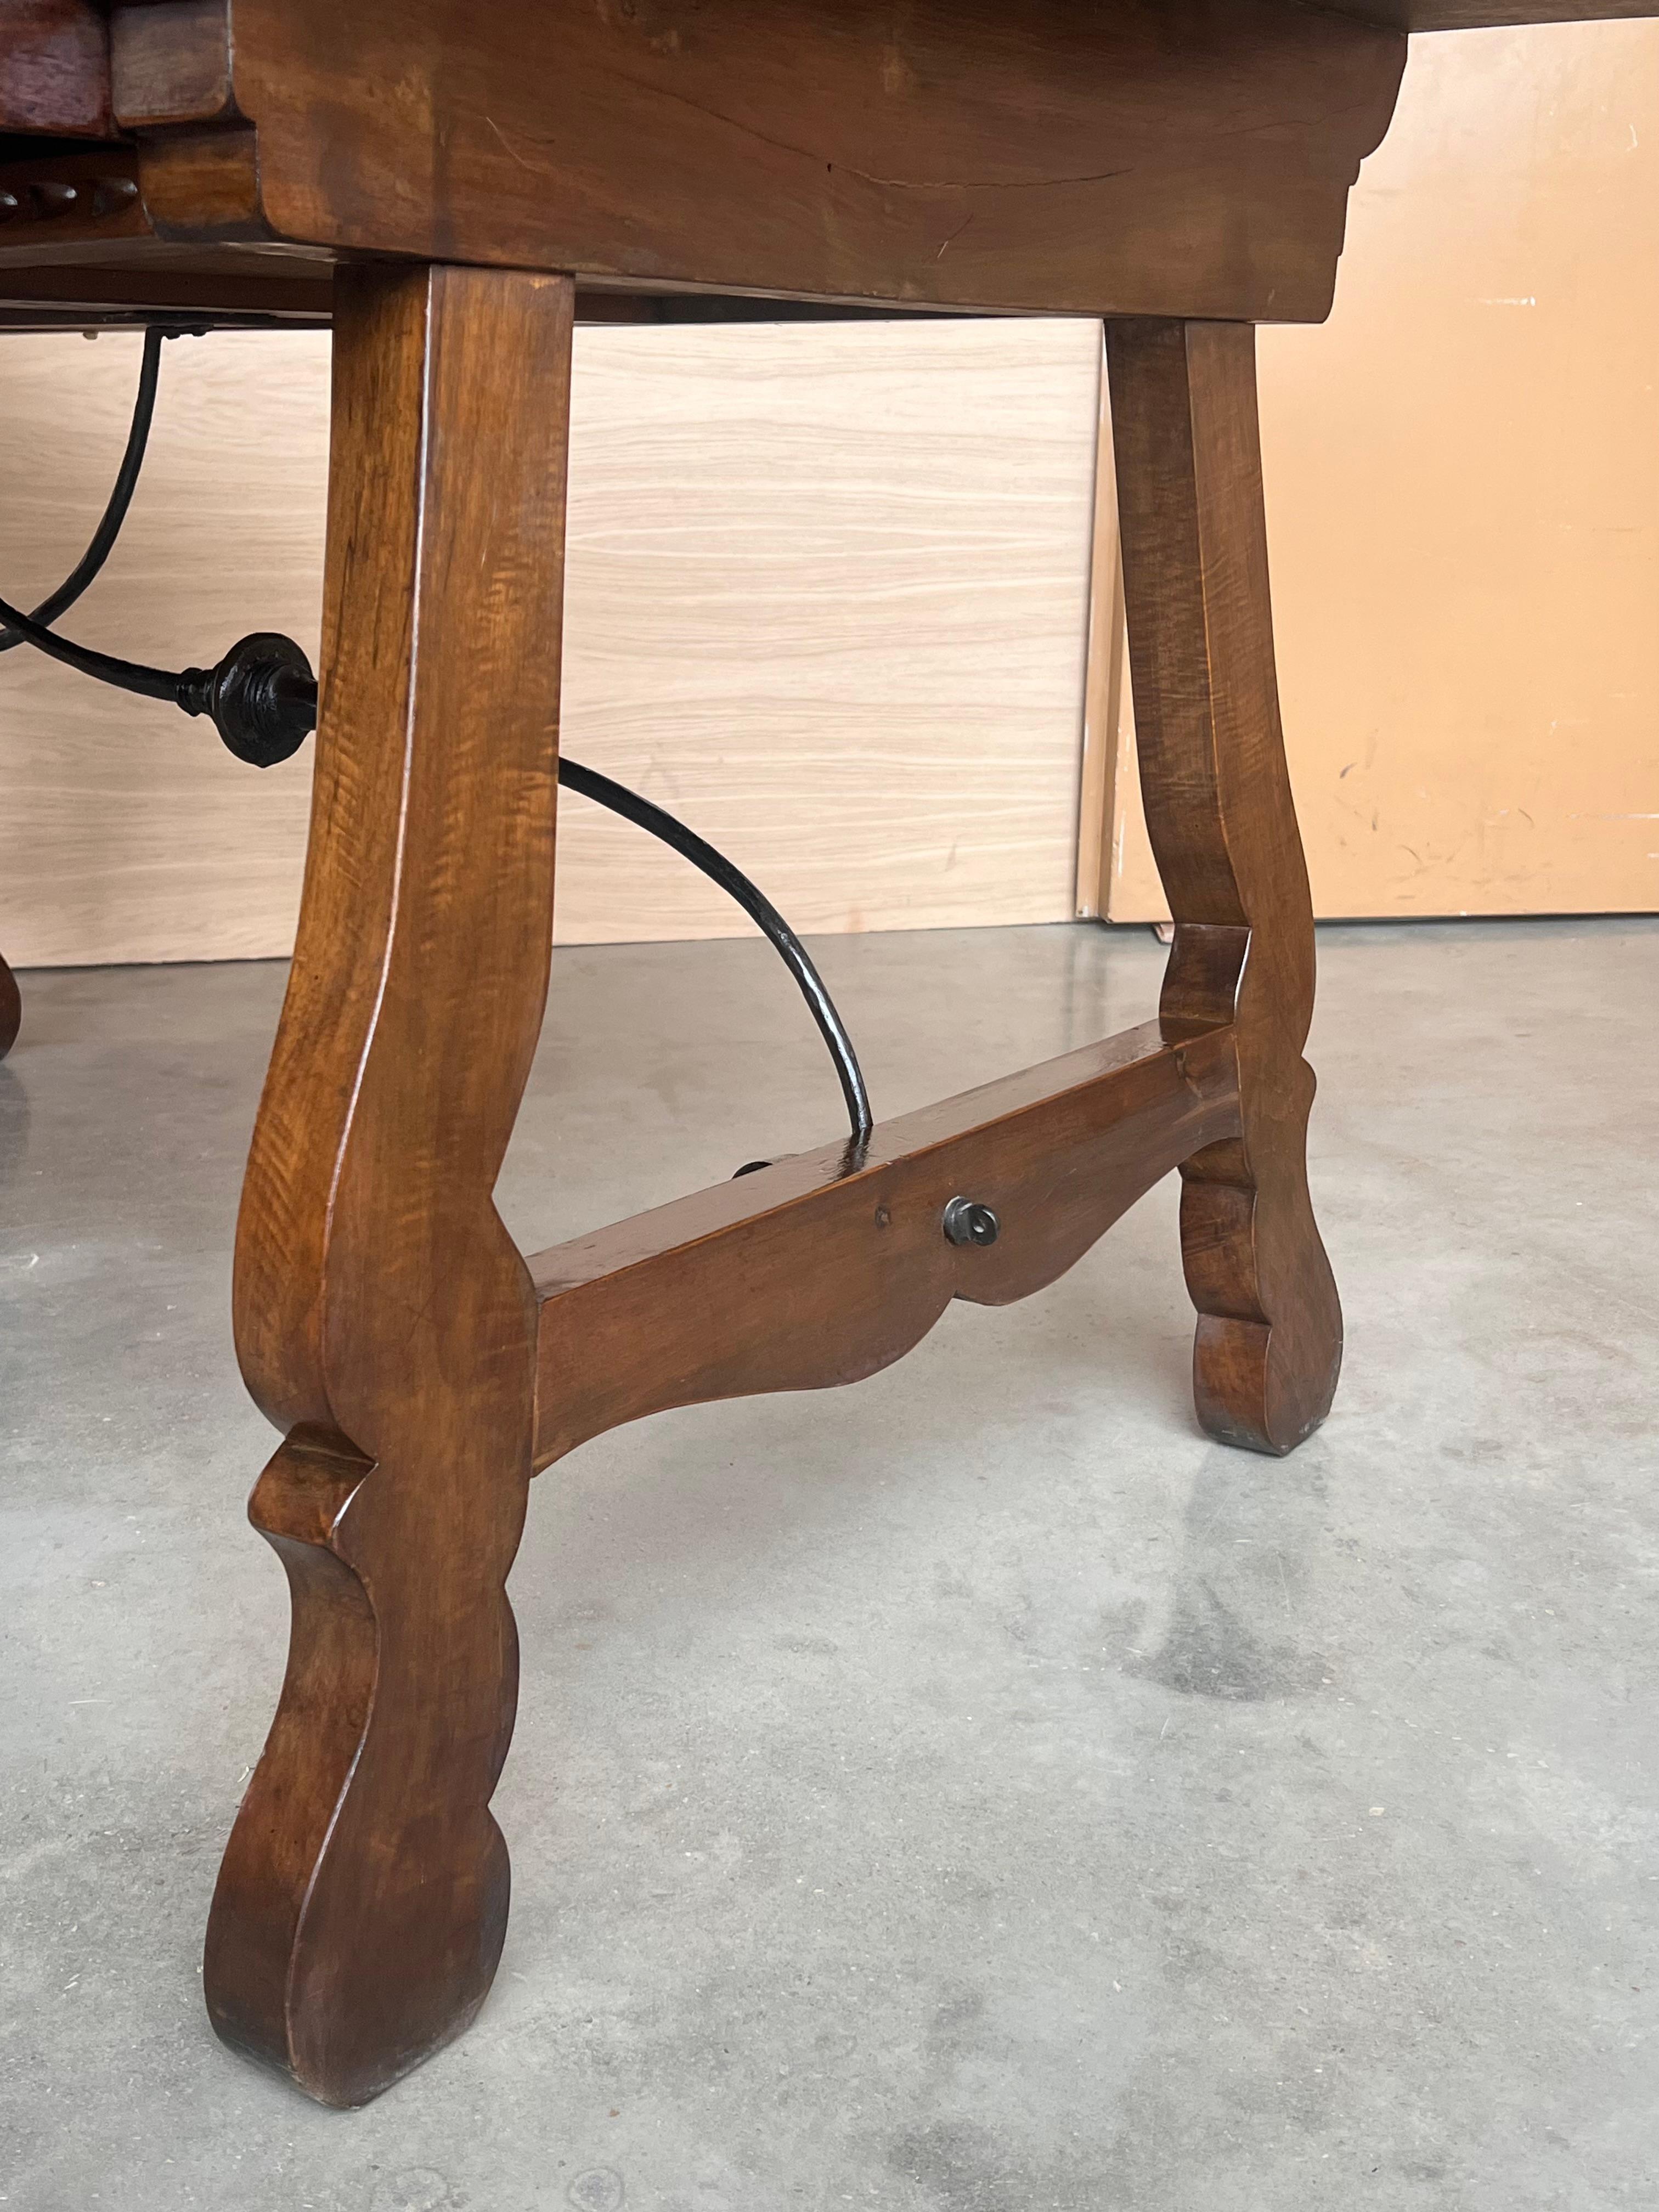 20th Century Solid Walnut Baroque Lyre-Leg Trestle Refectory Desk Writing Table For Sale 8